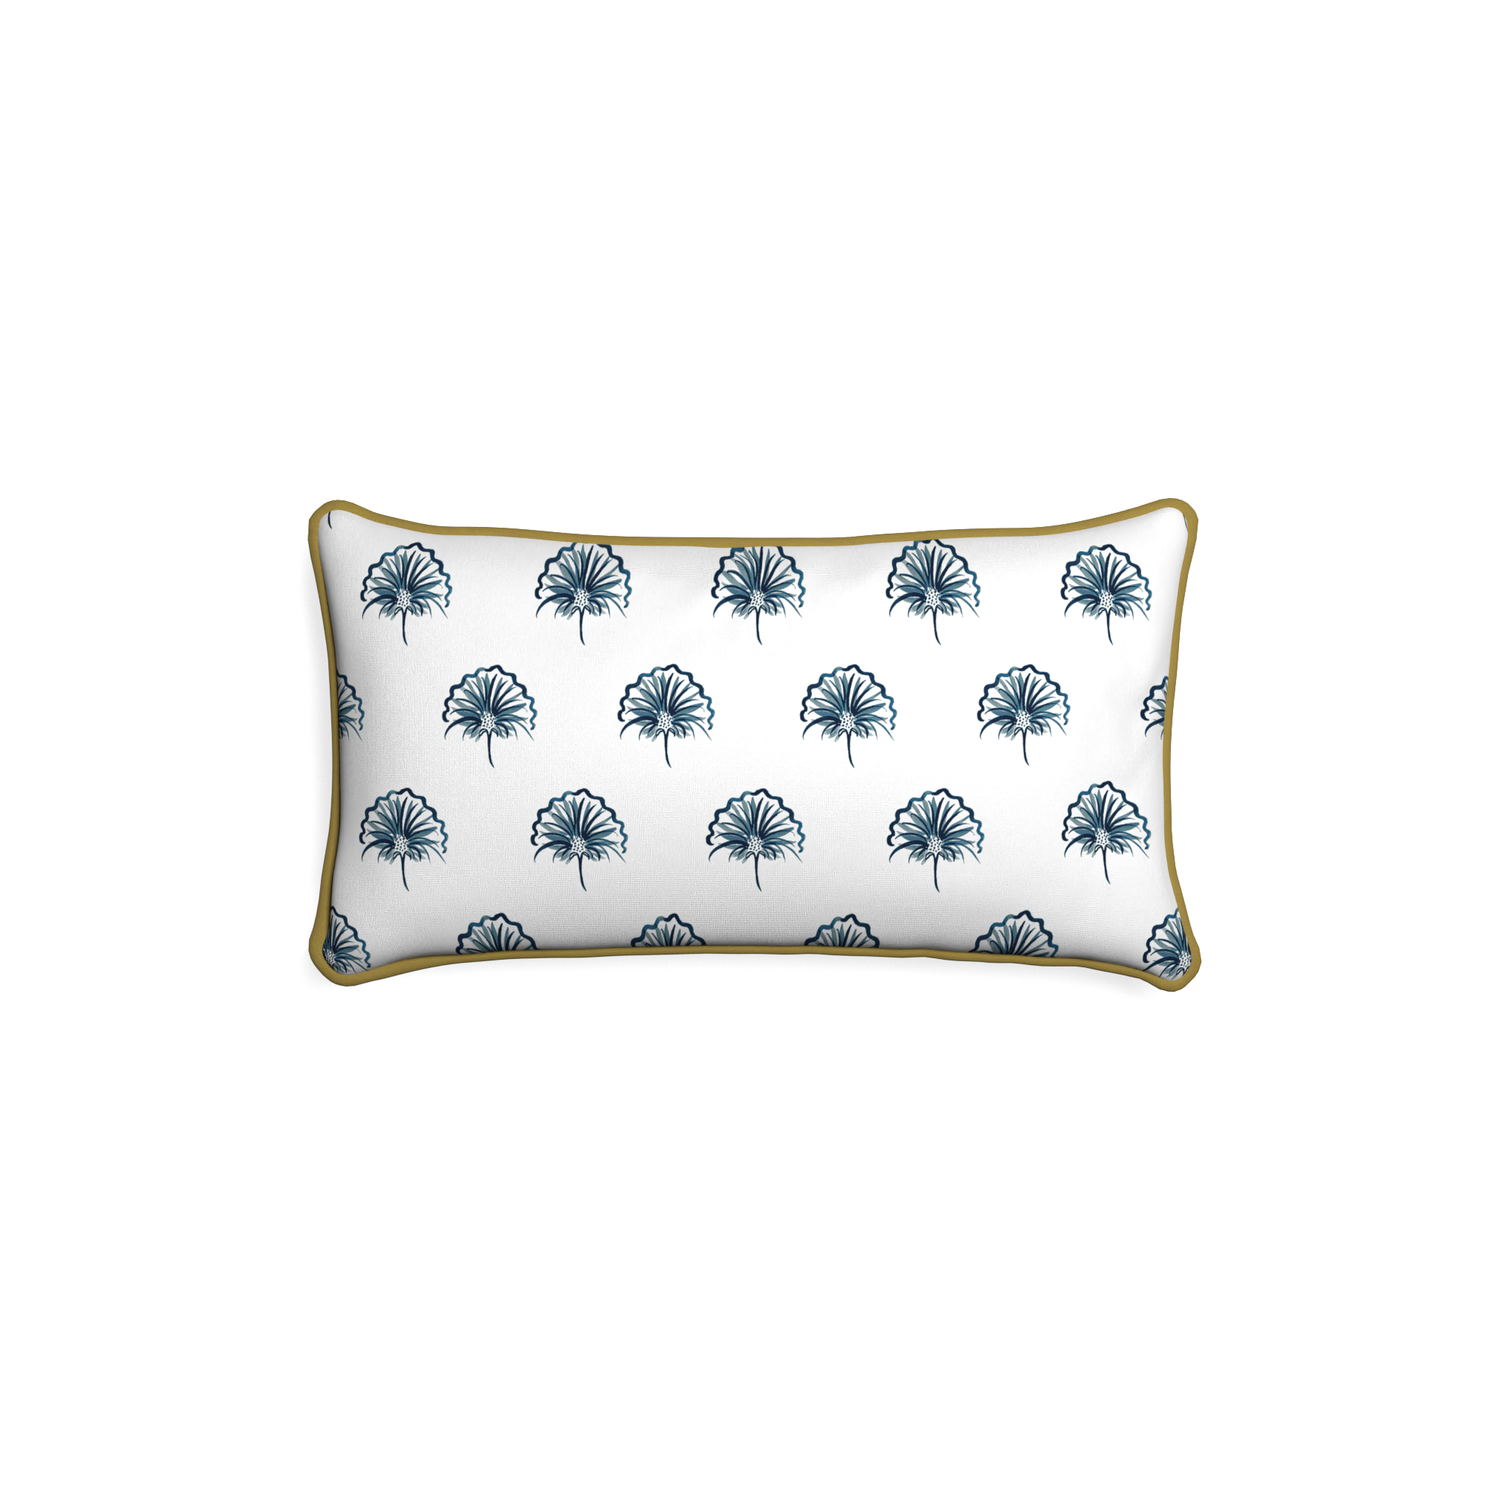 Petite-lumbar penelope midnight custom floral navypillow with c piping on white background